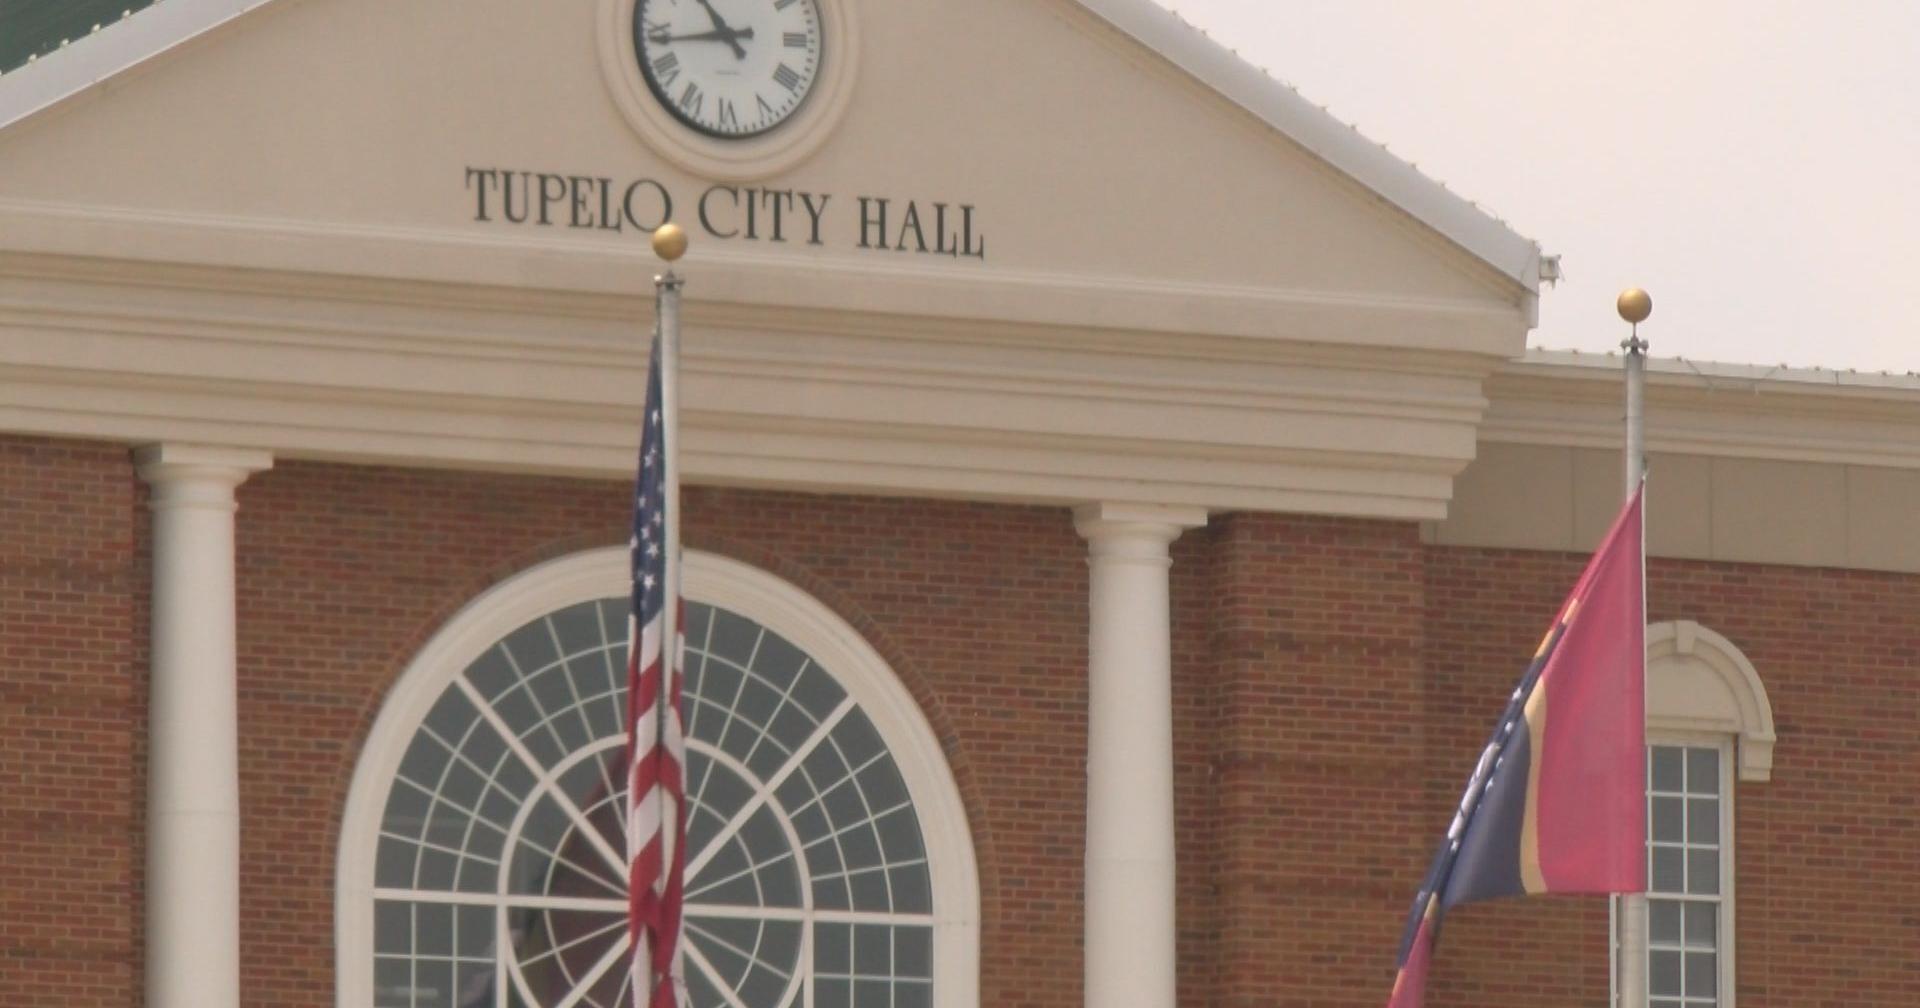 Tupelo continues to be one of the fastest growing cities in Northeast Mississippi